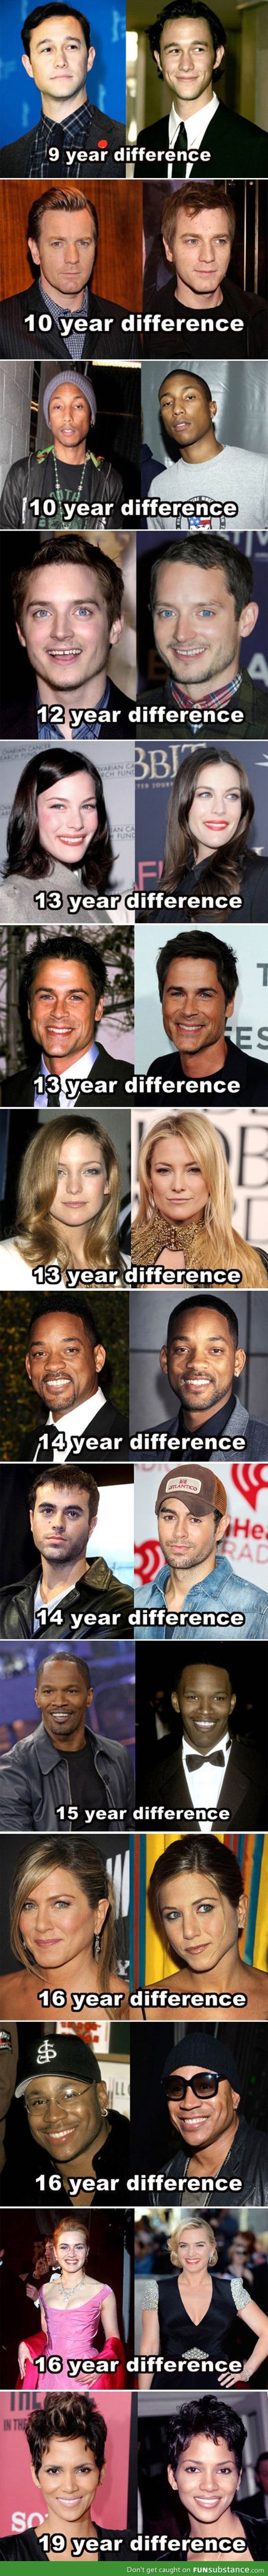 Celebs who don't age